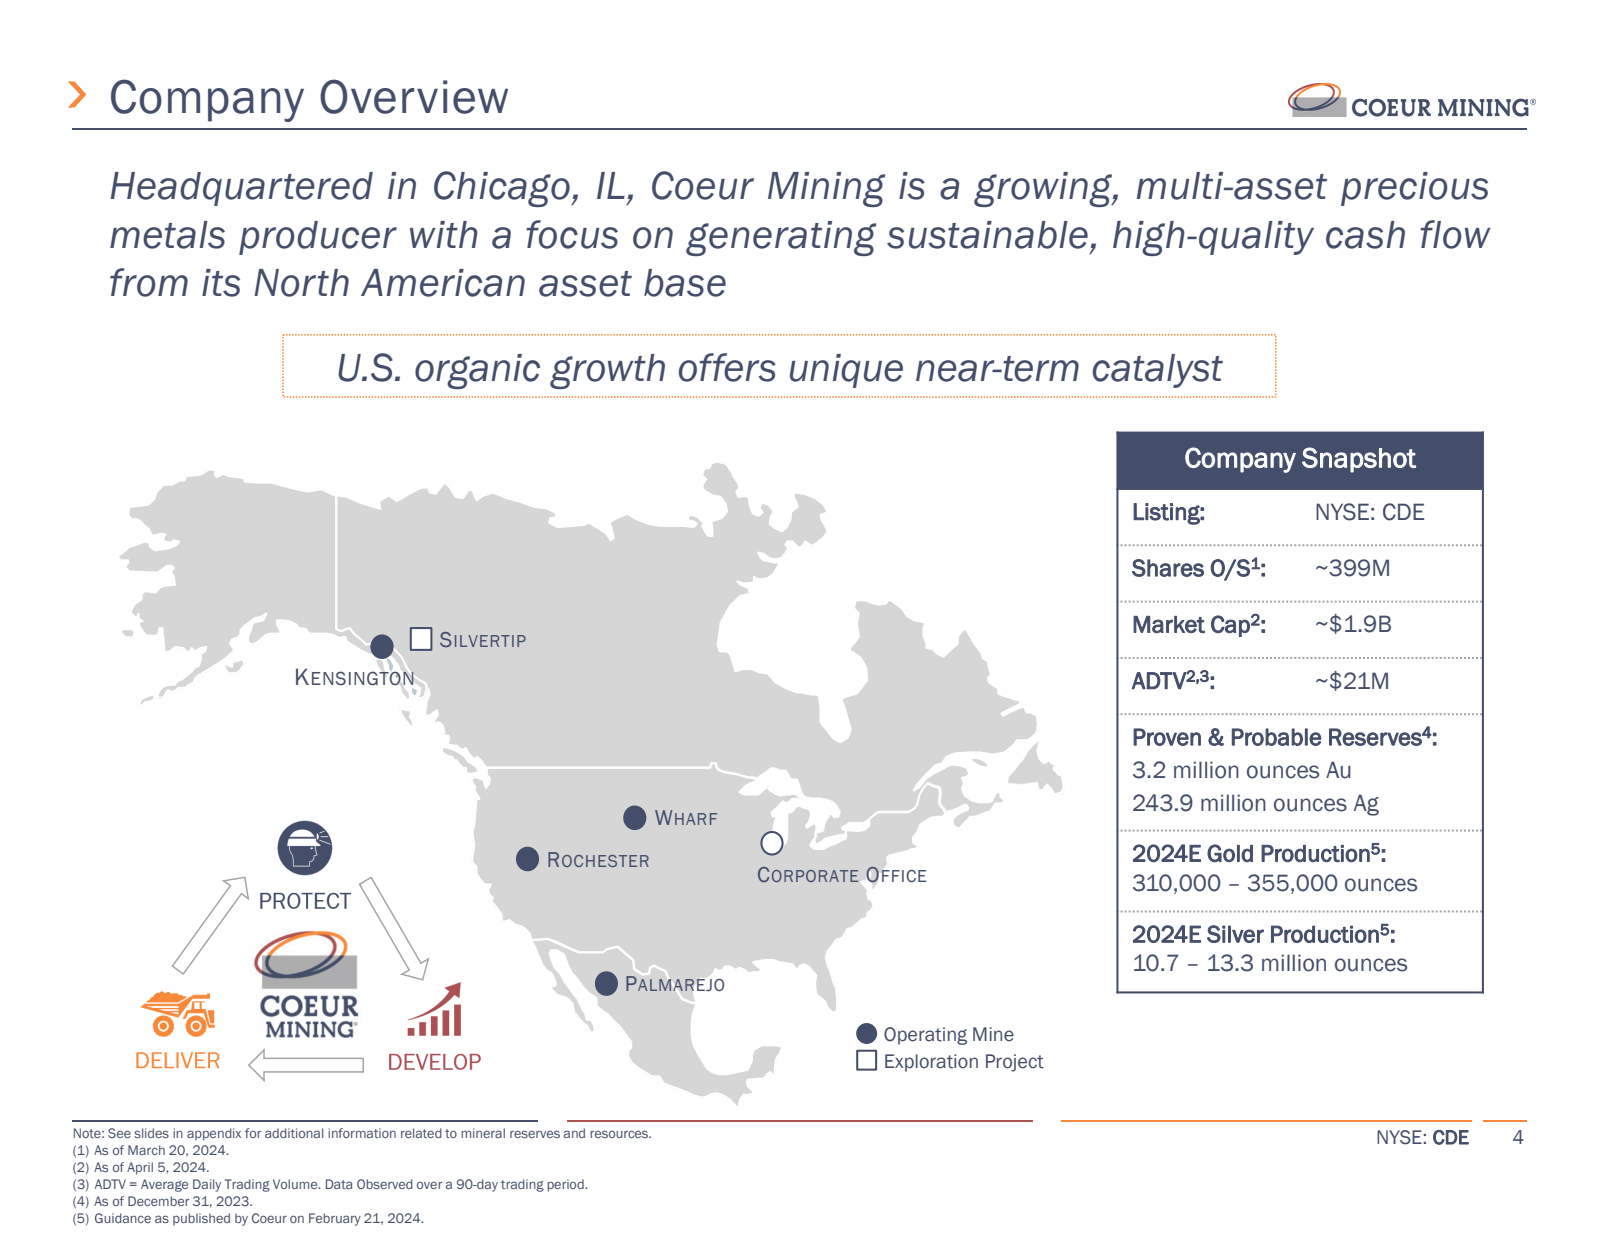 > Company Overview 
